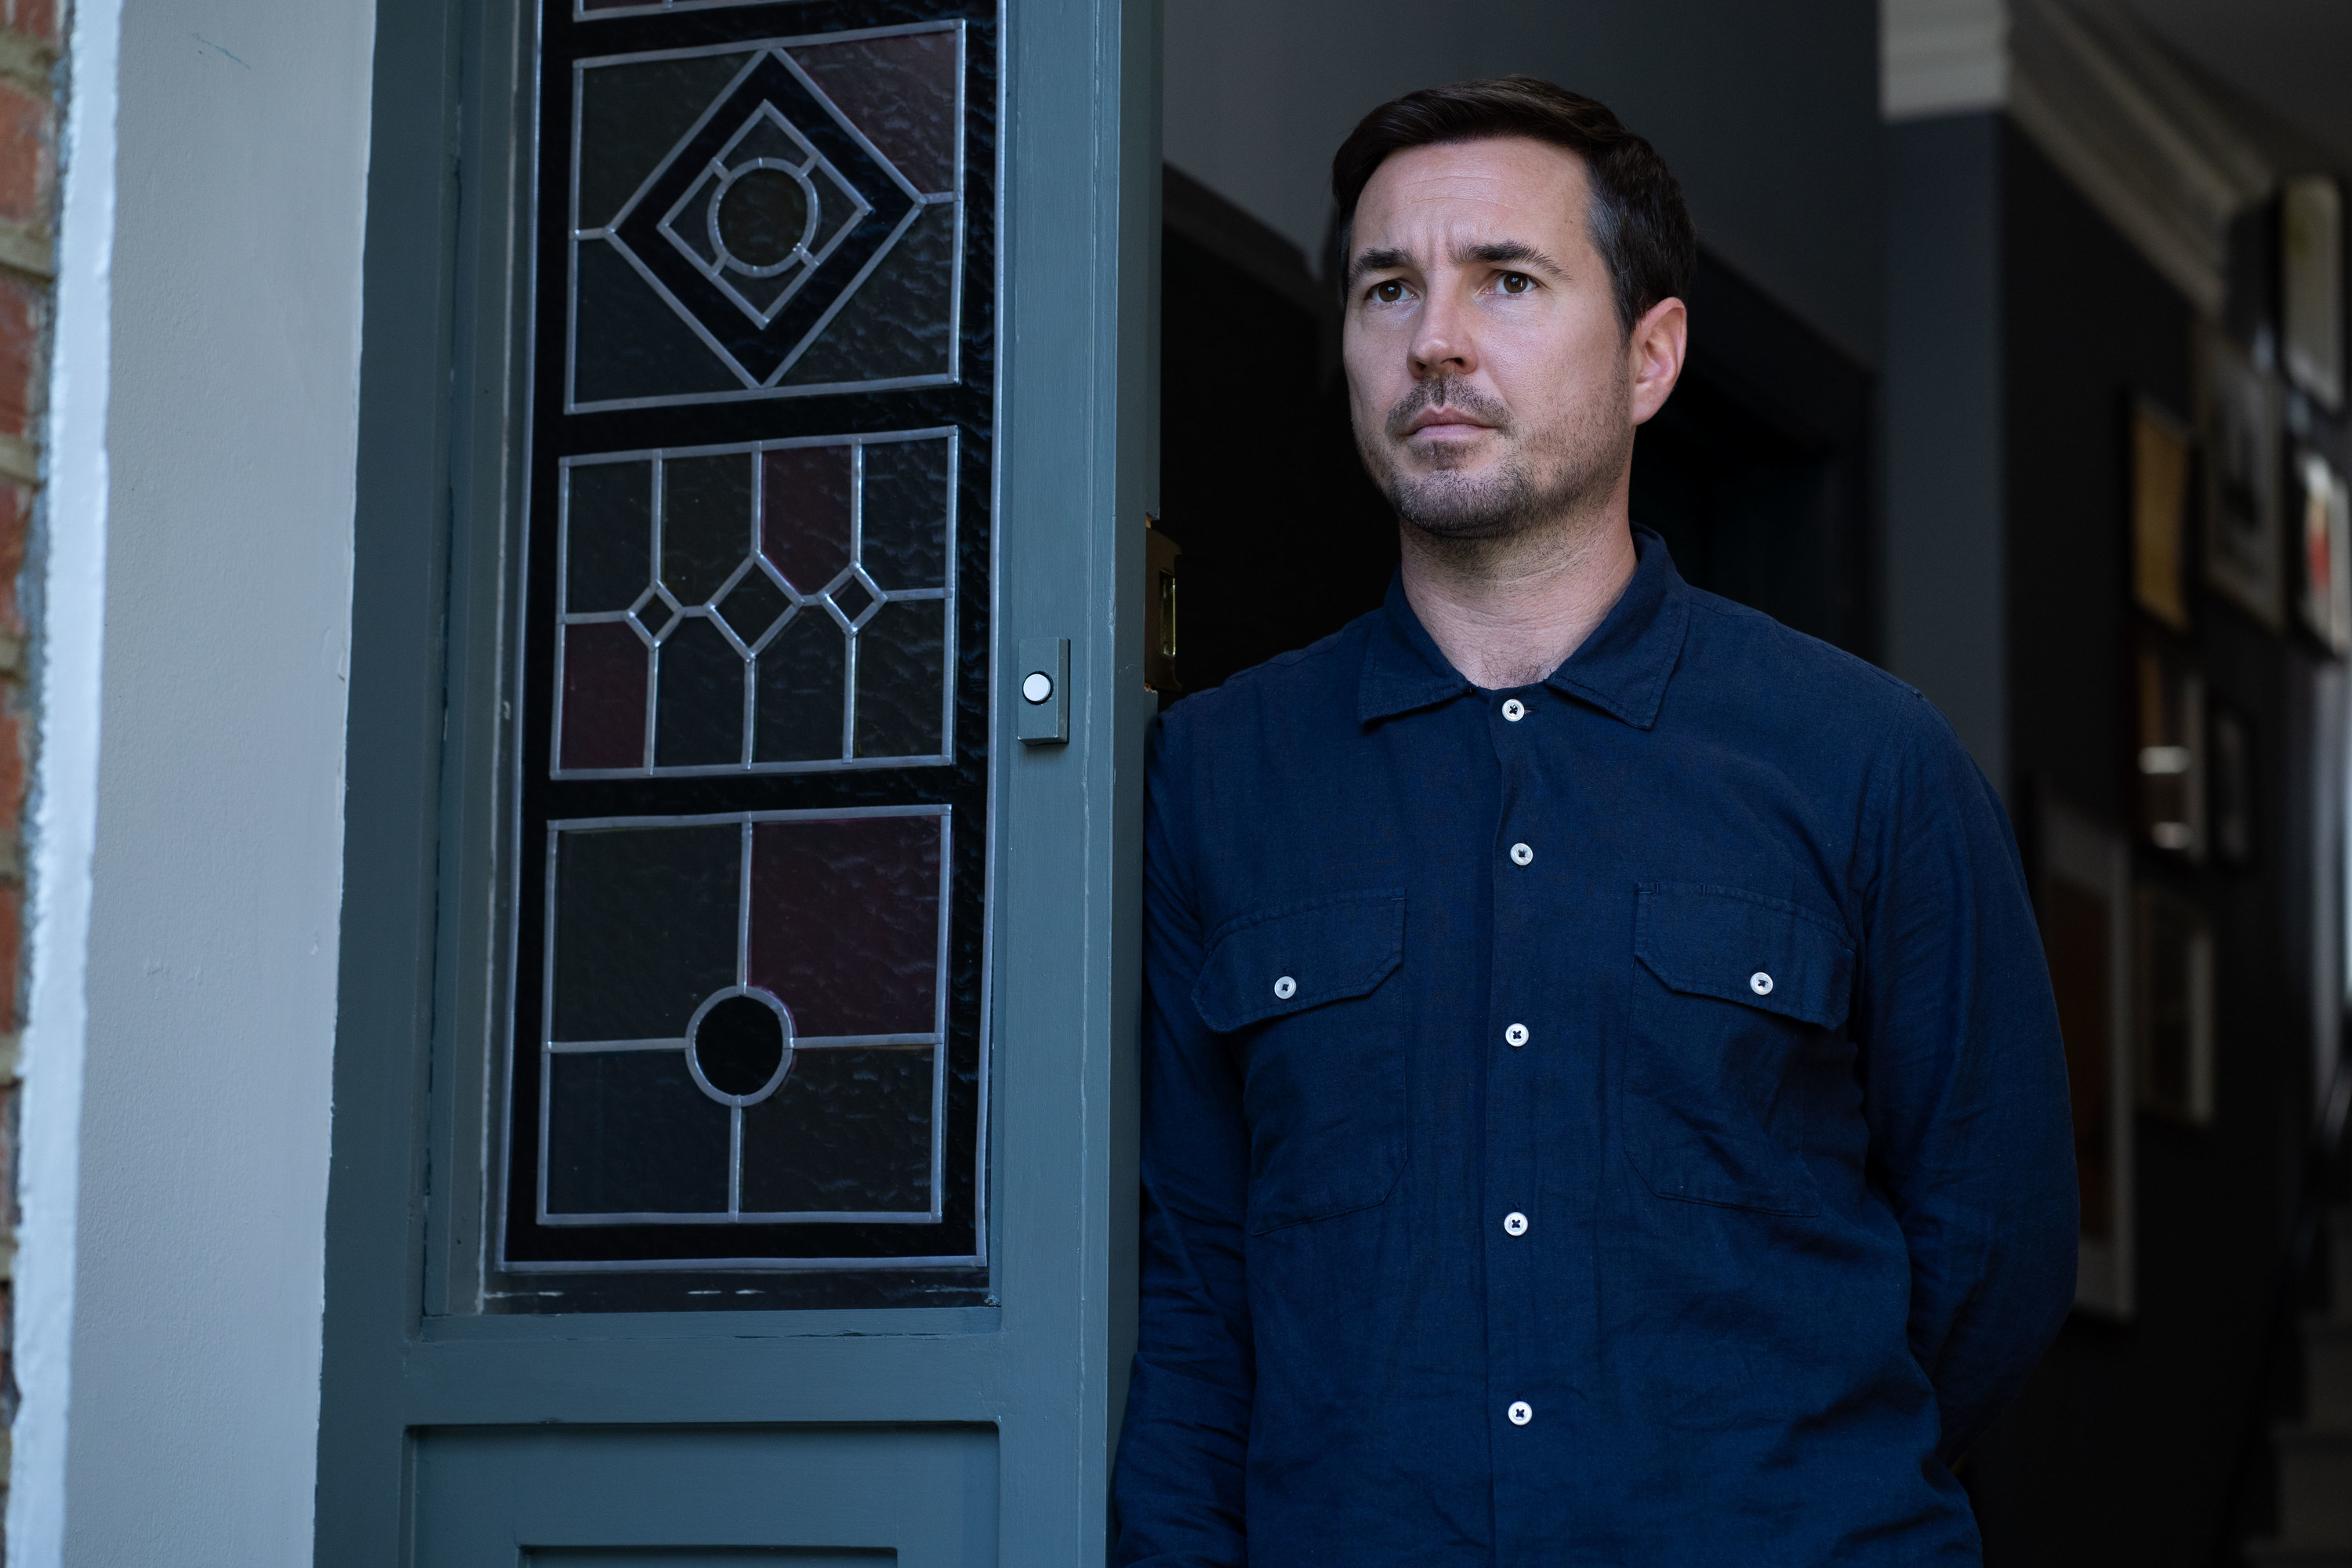 Martin Compston as Bram Lawson standing at the entrance of the house looking serious